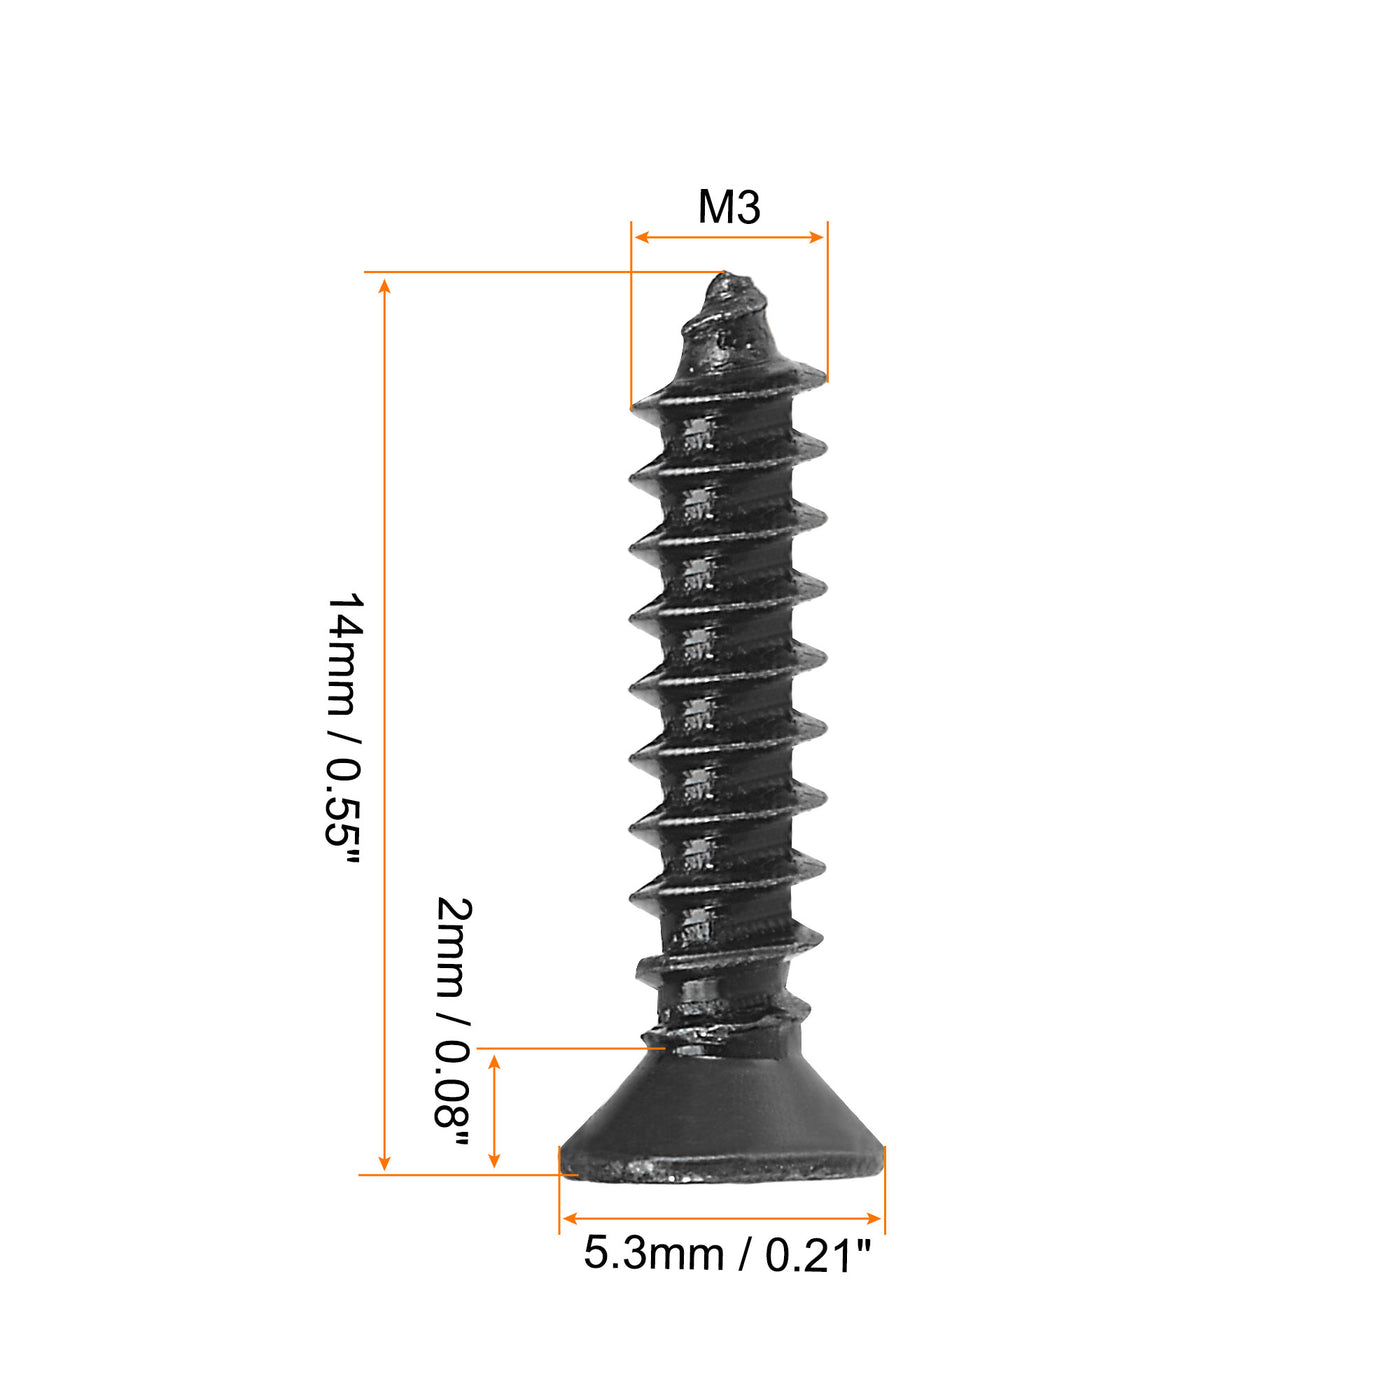 uxcell Uxcell 200pcs M3 x 14mm Wood Screws Phillips Flat Head Carbon Steel Self Tapping Black